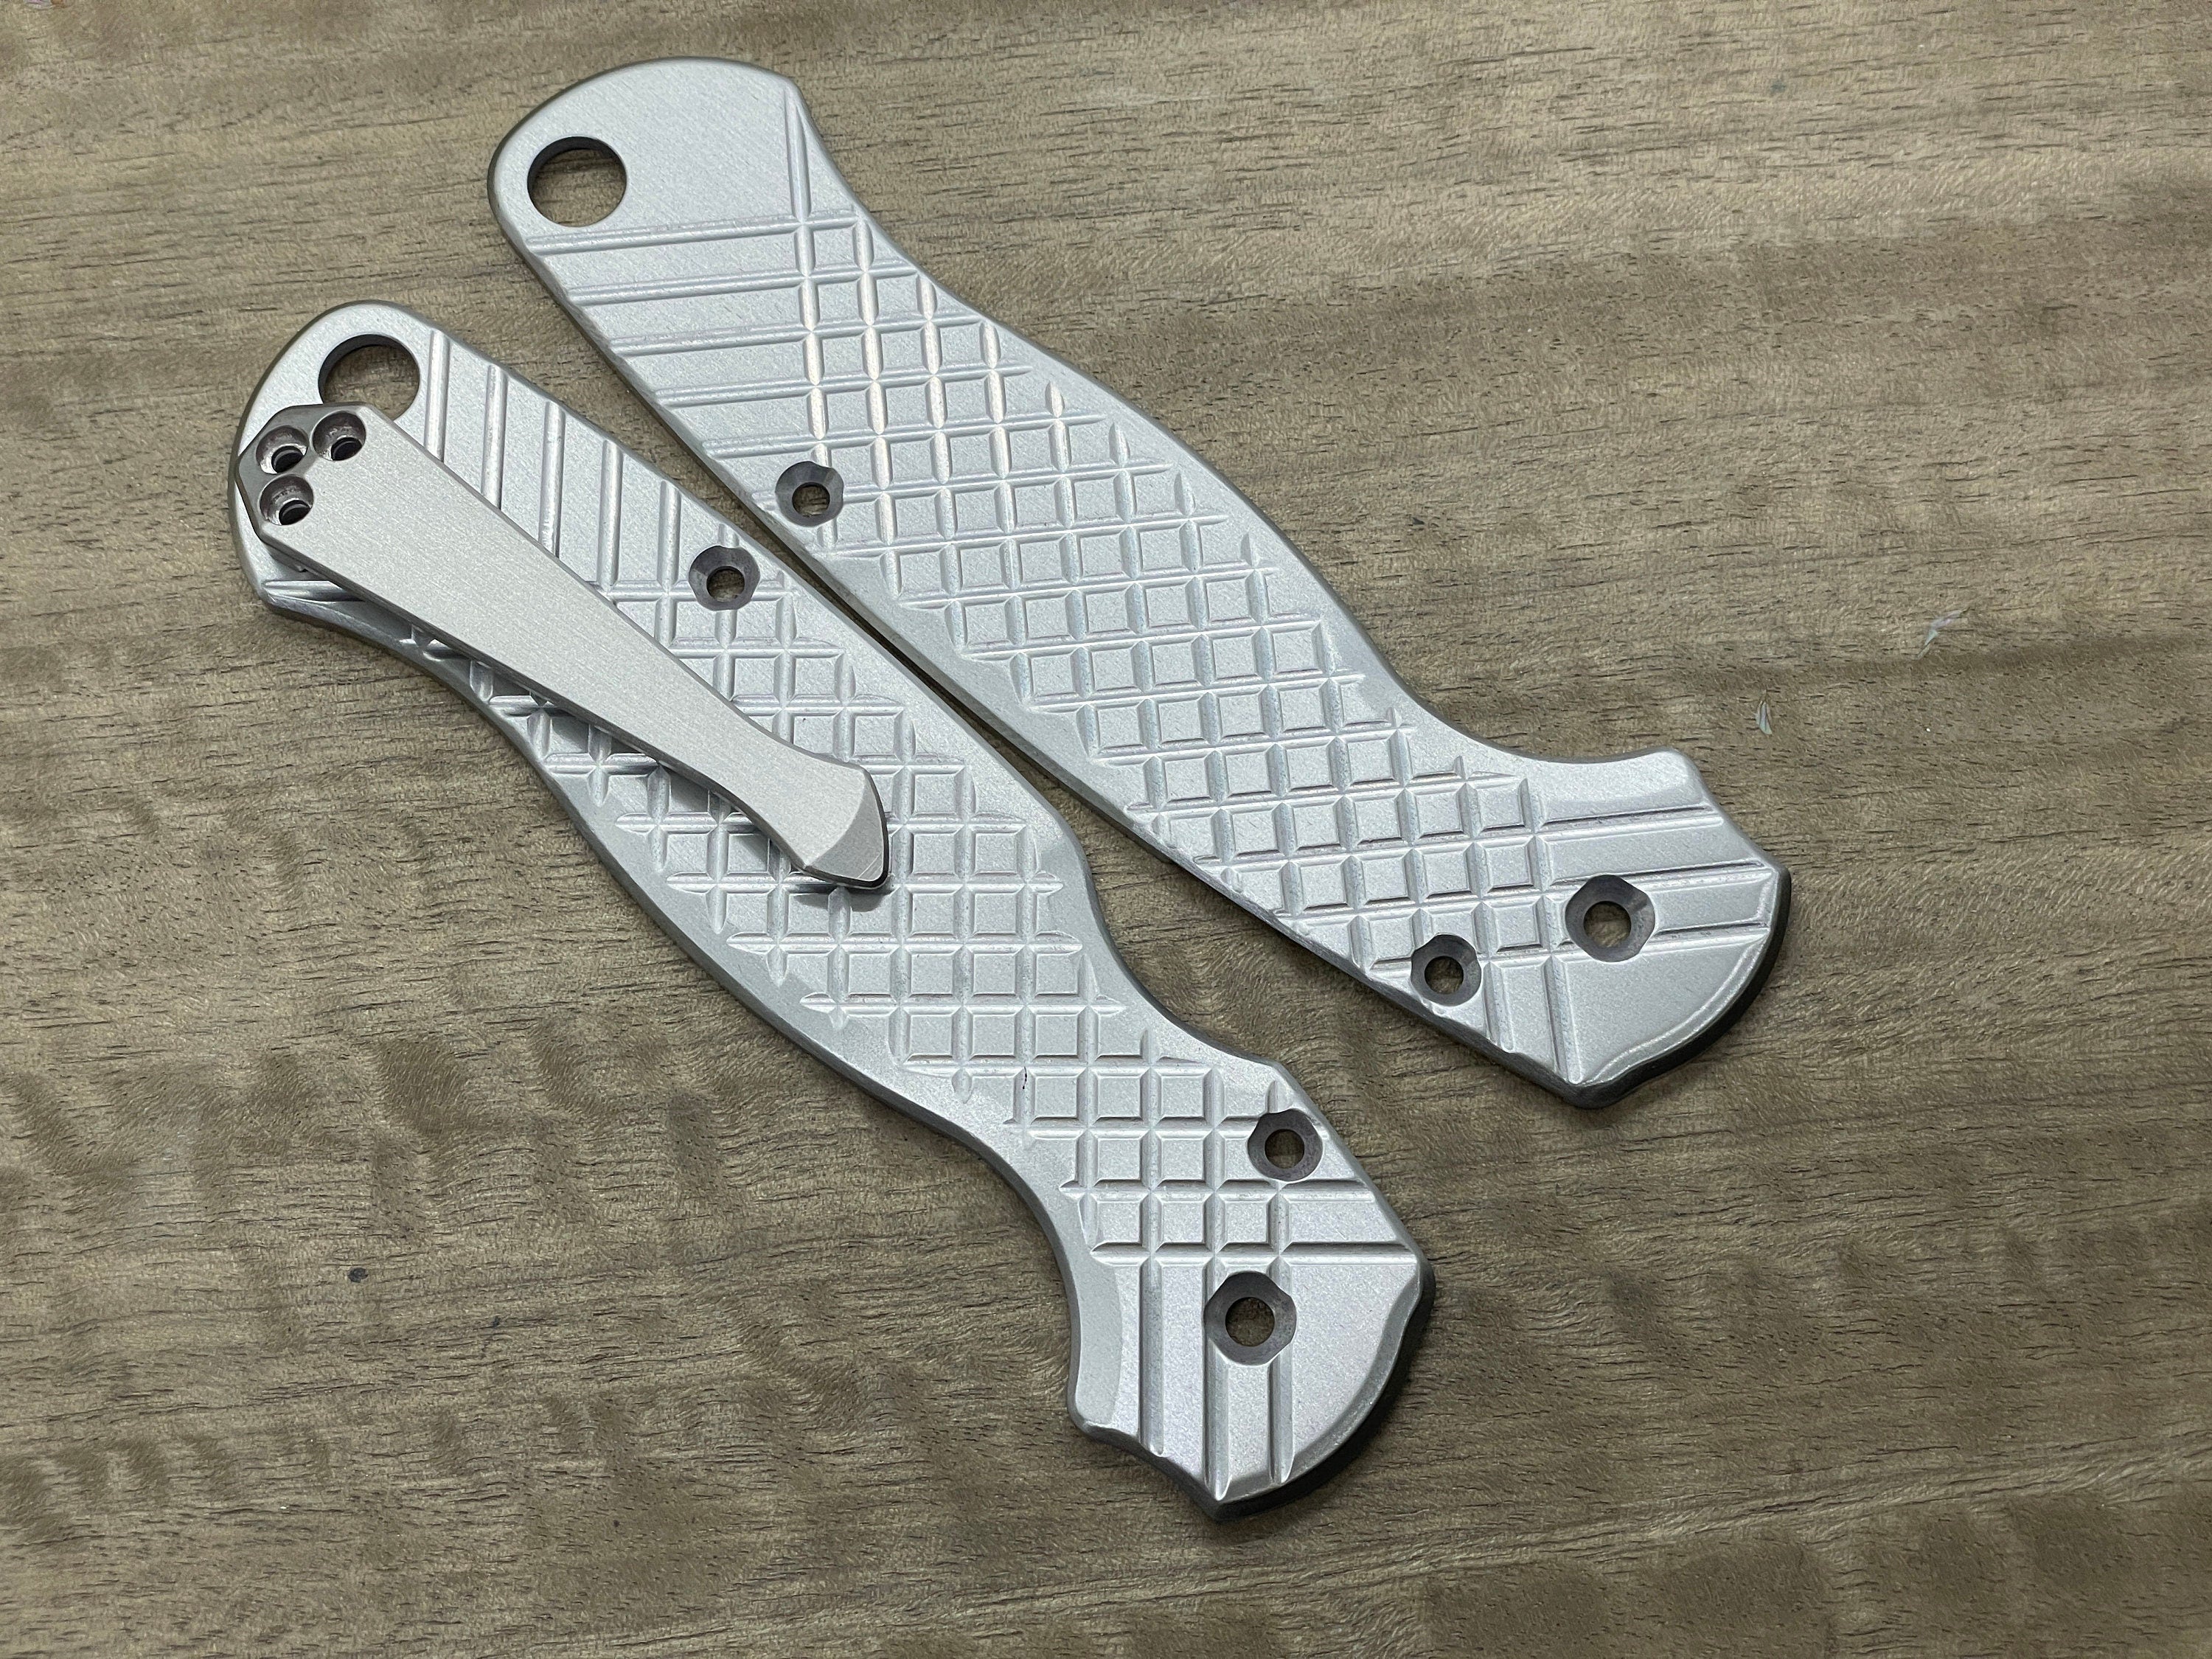 Redesigned FRAG milled Titanium scales for Spyderco Paramilitary 2